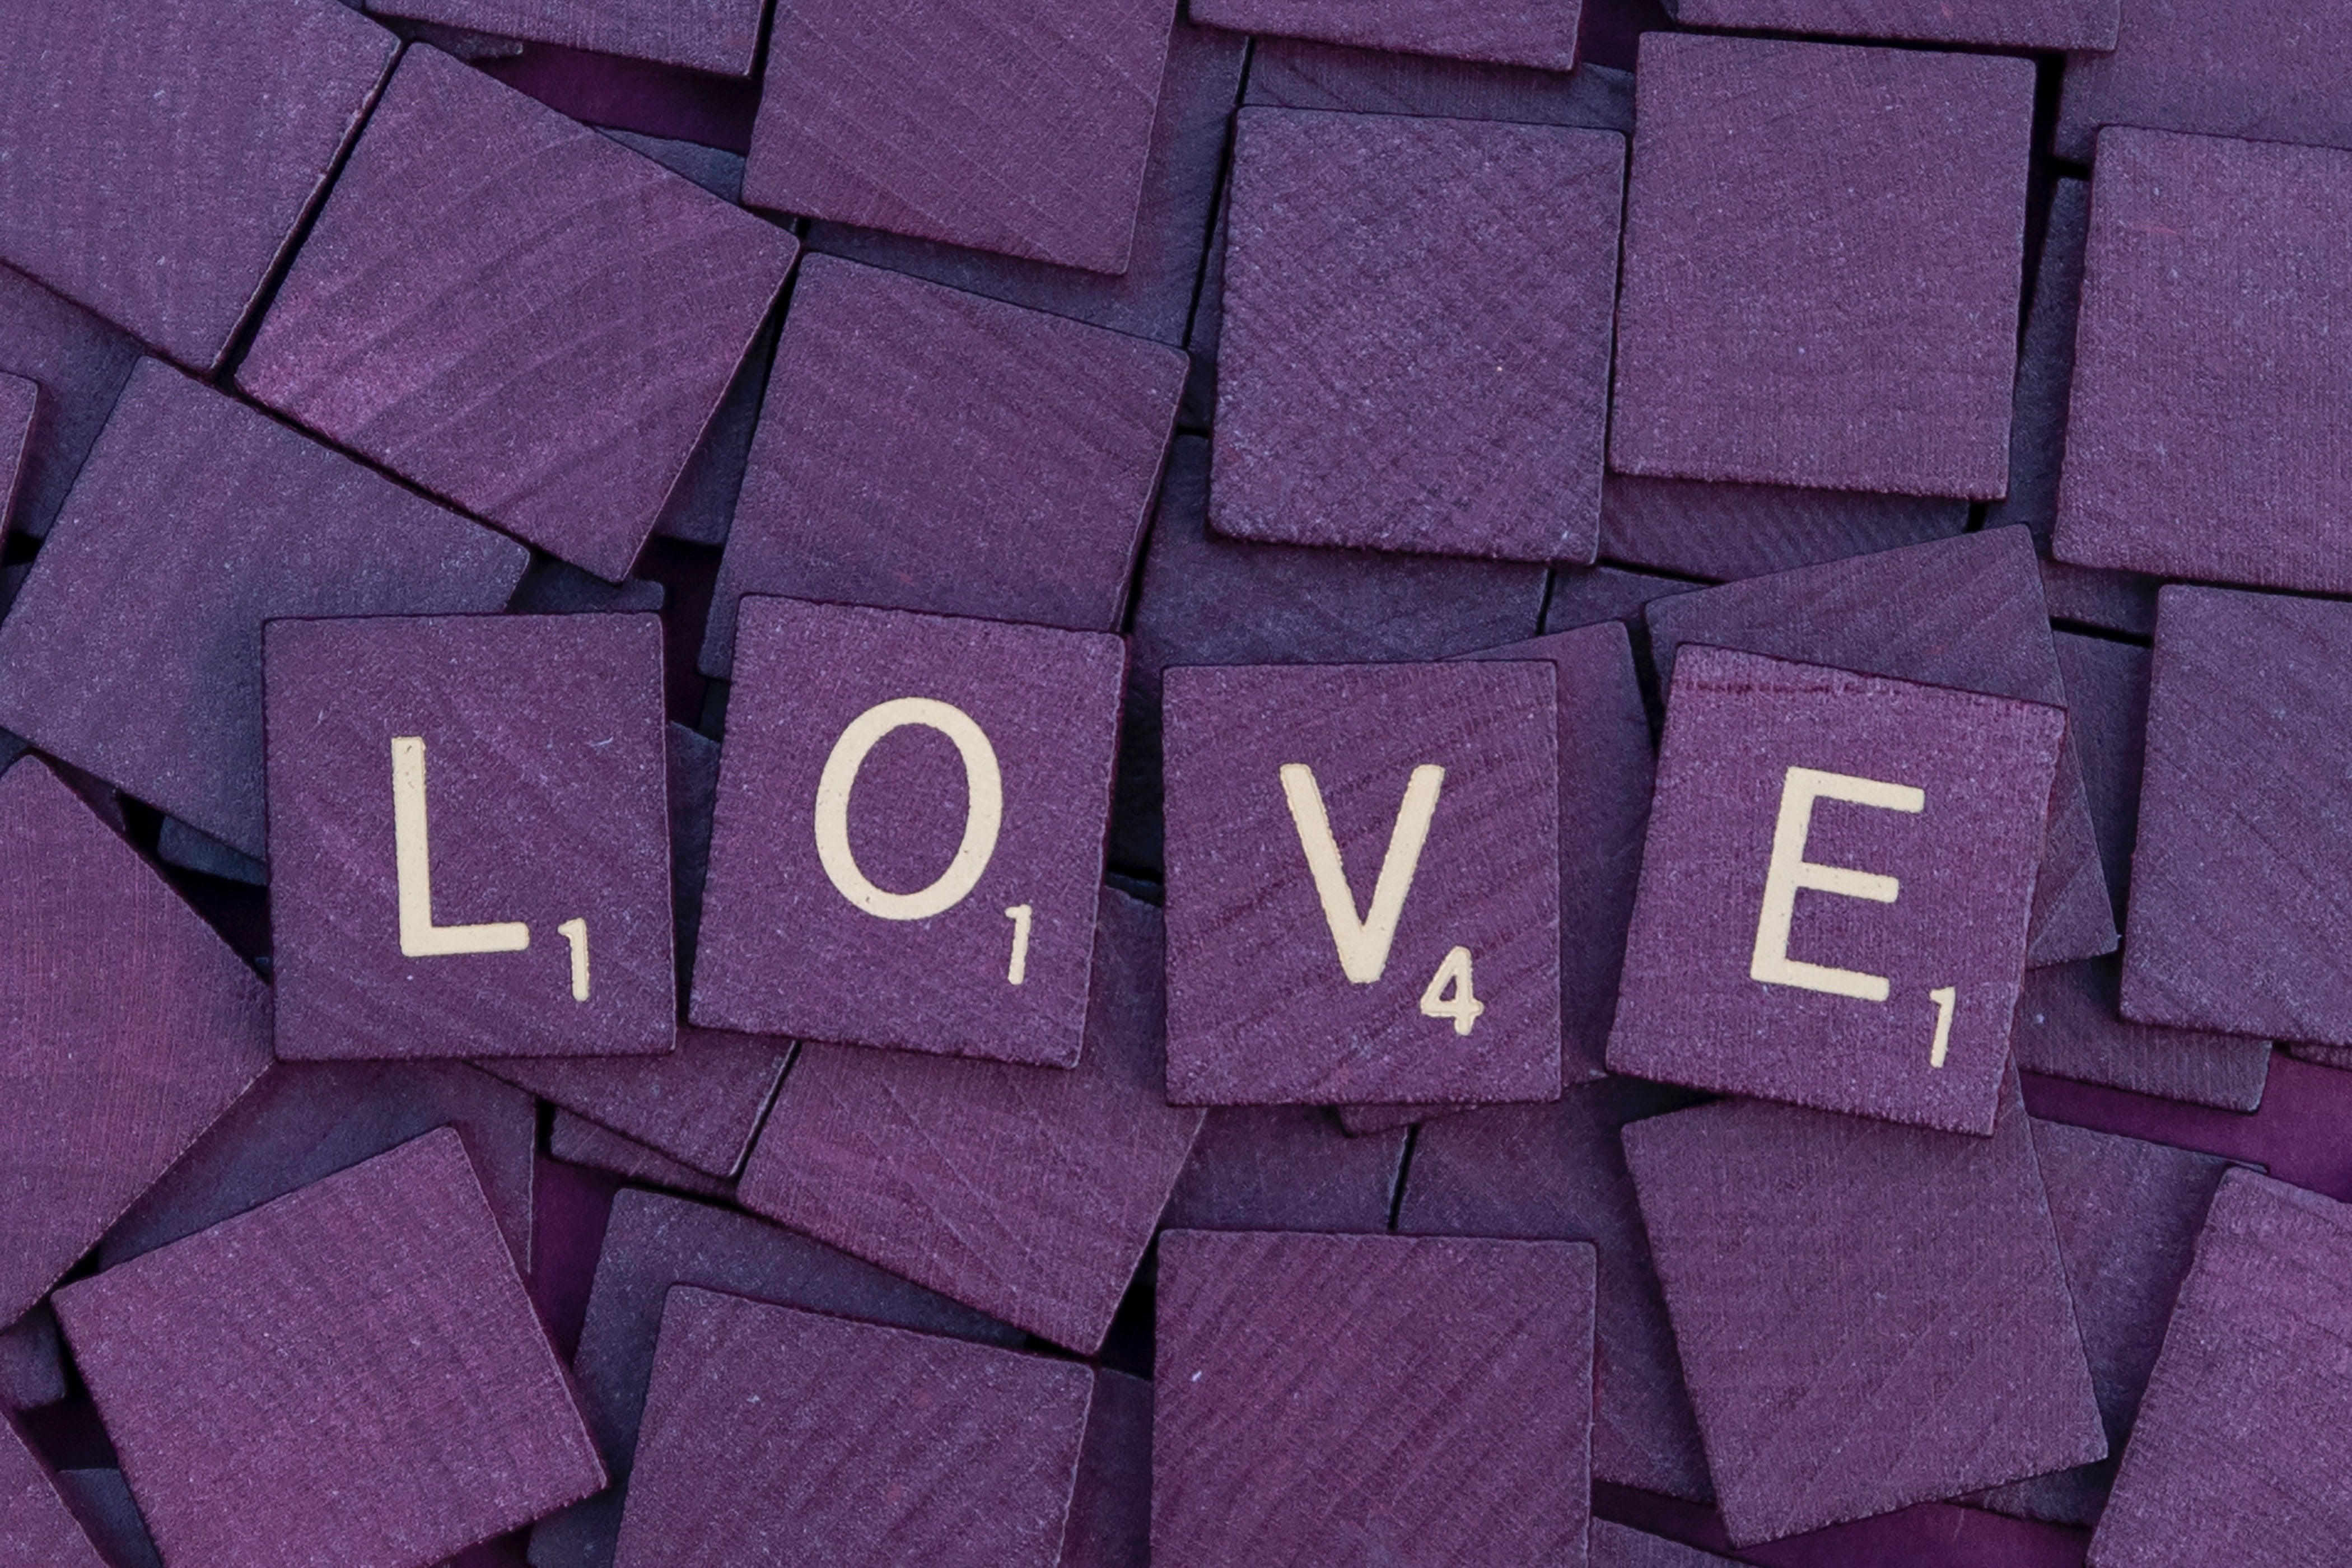 What Love Language Do You Speak? Understanding Your Partner’s Preferences